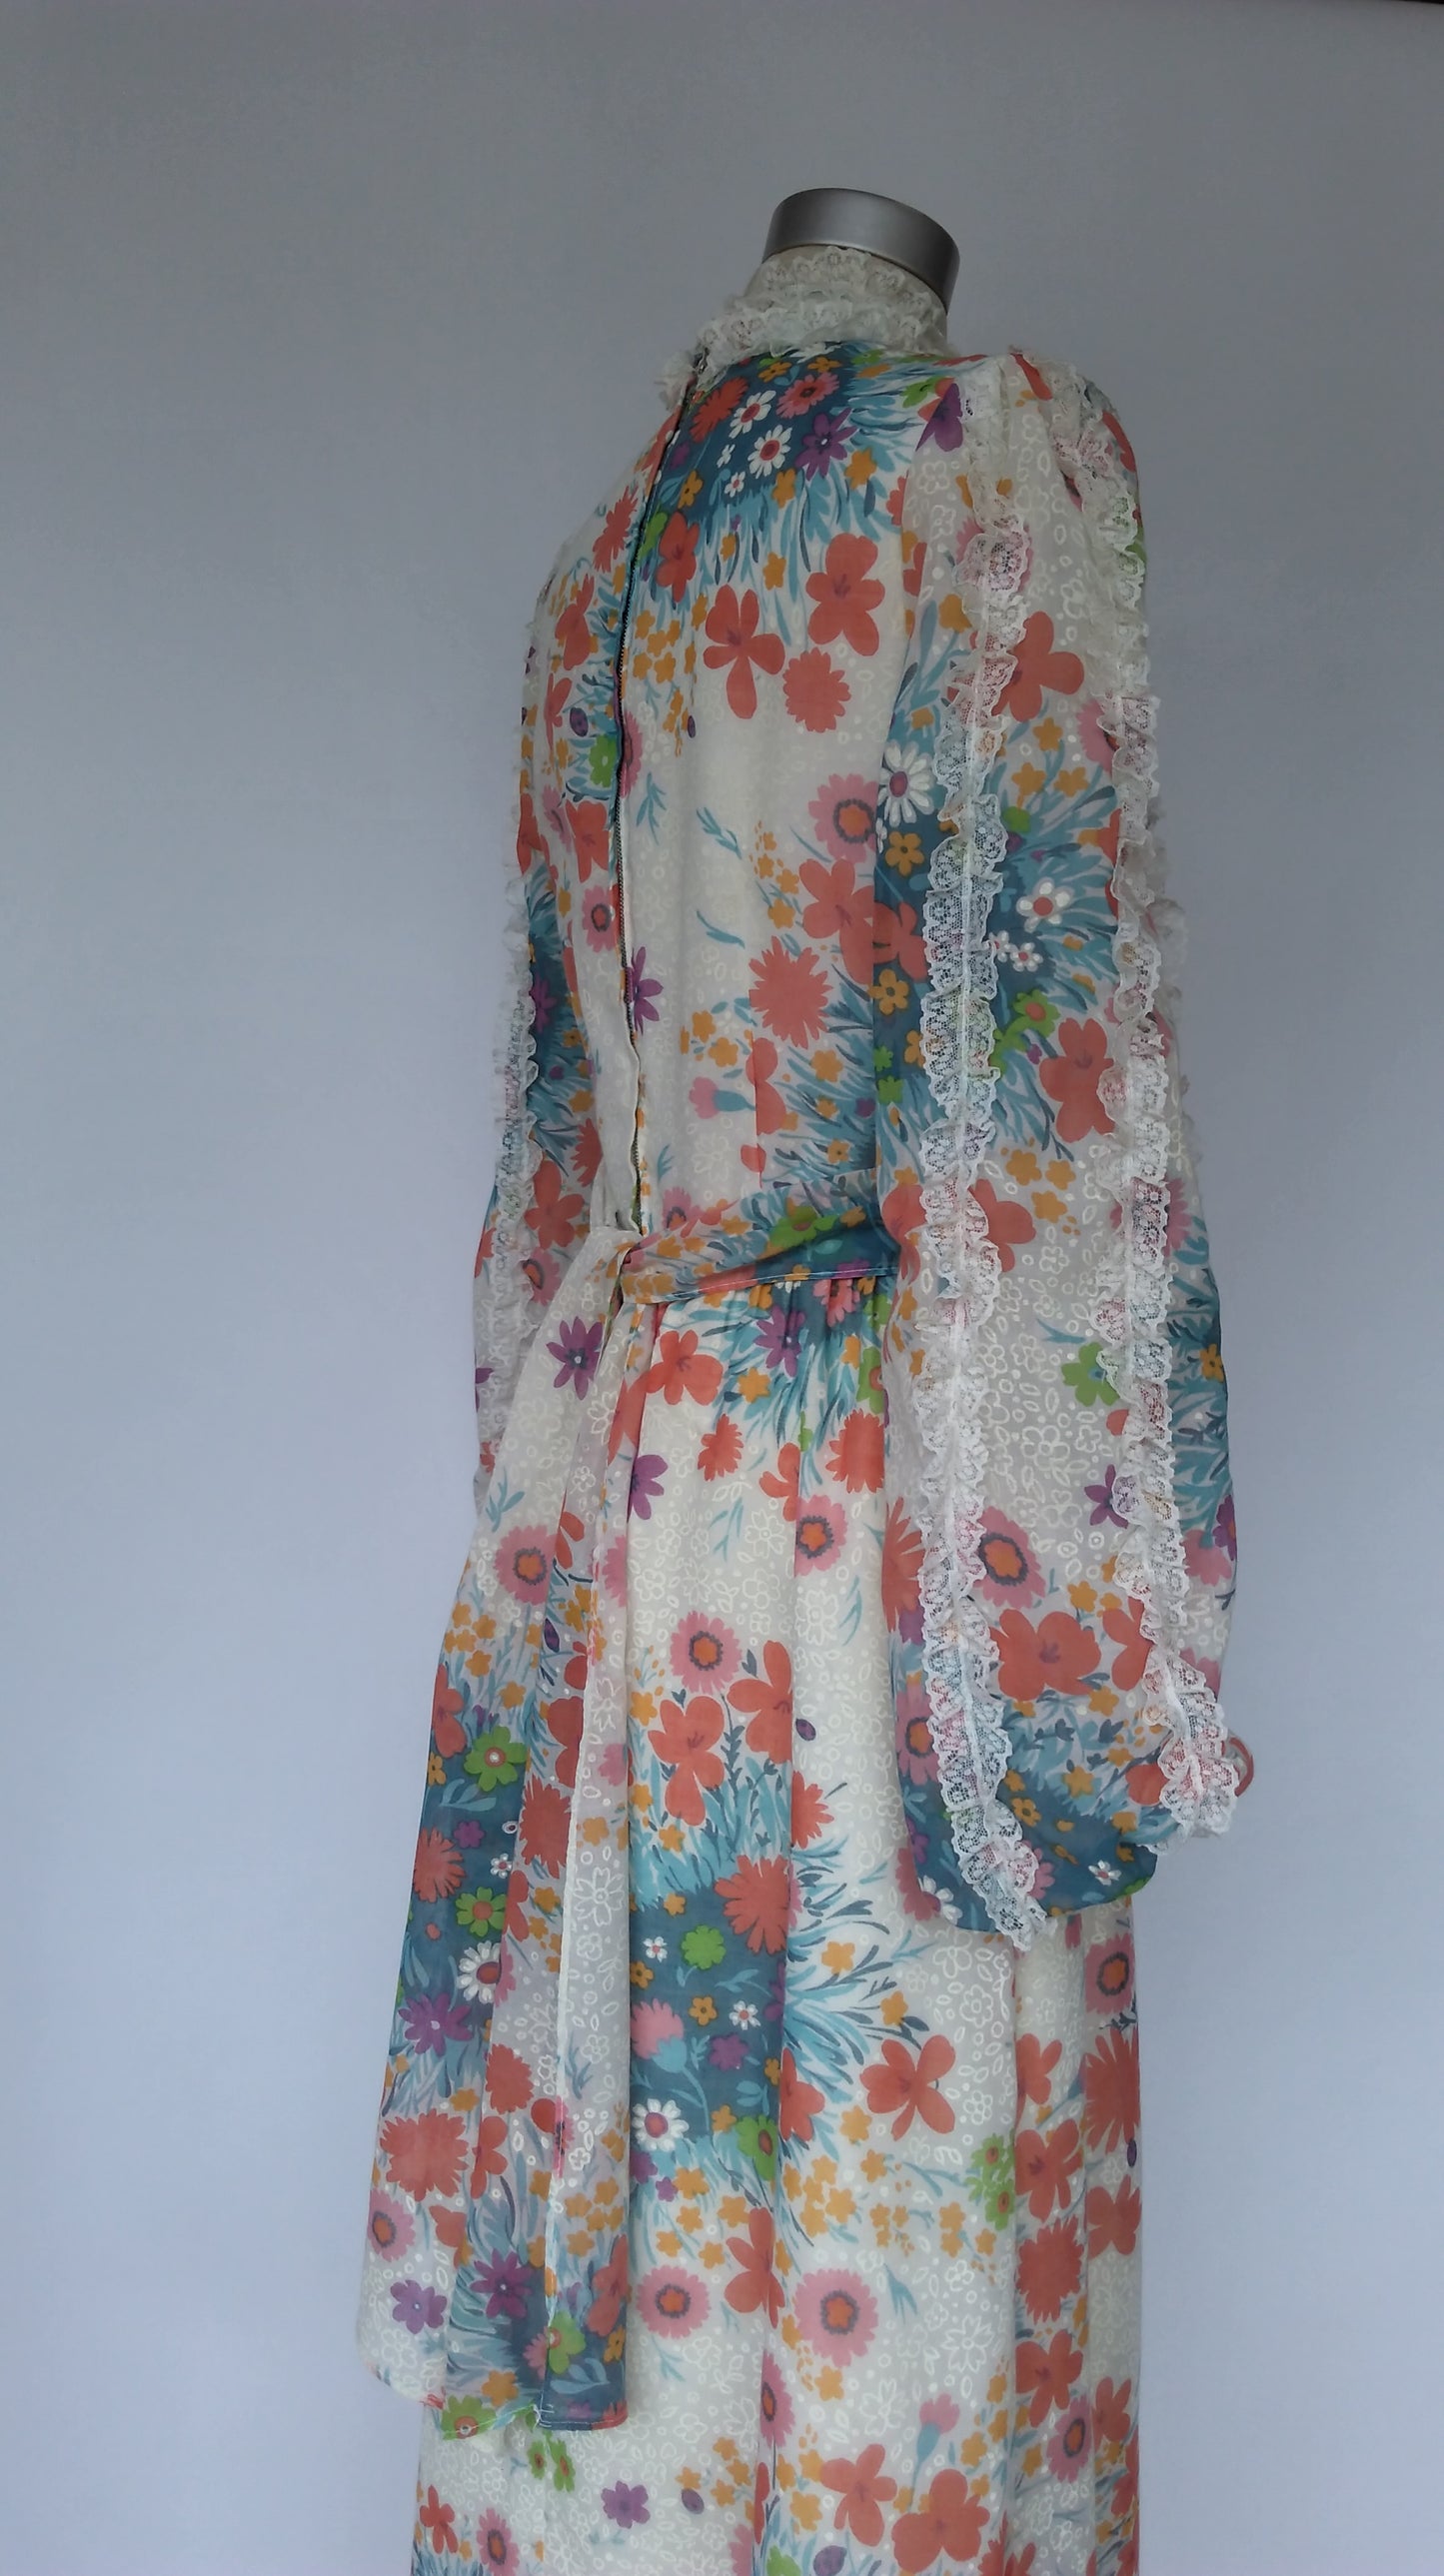 Floral and Lace Maxi Dress 1970s